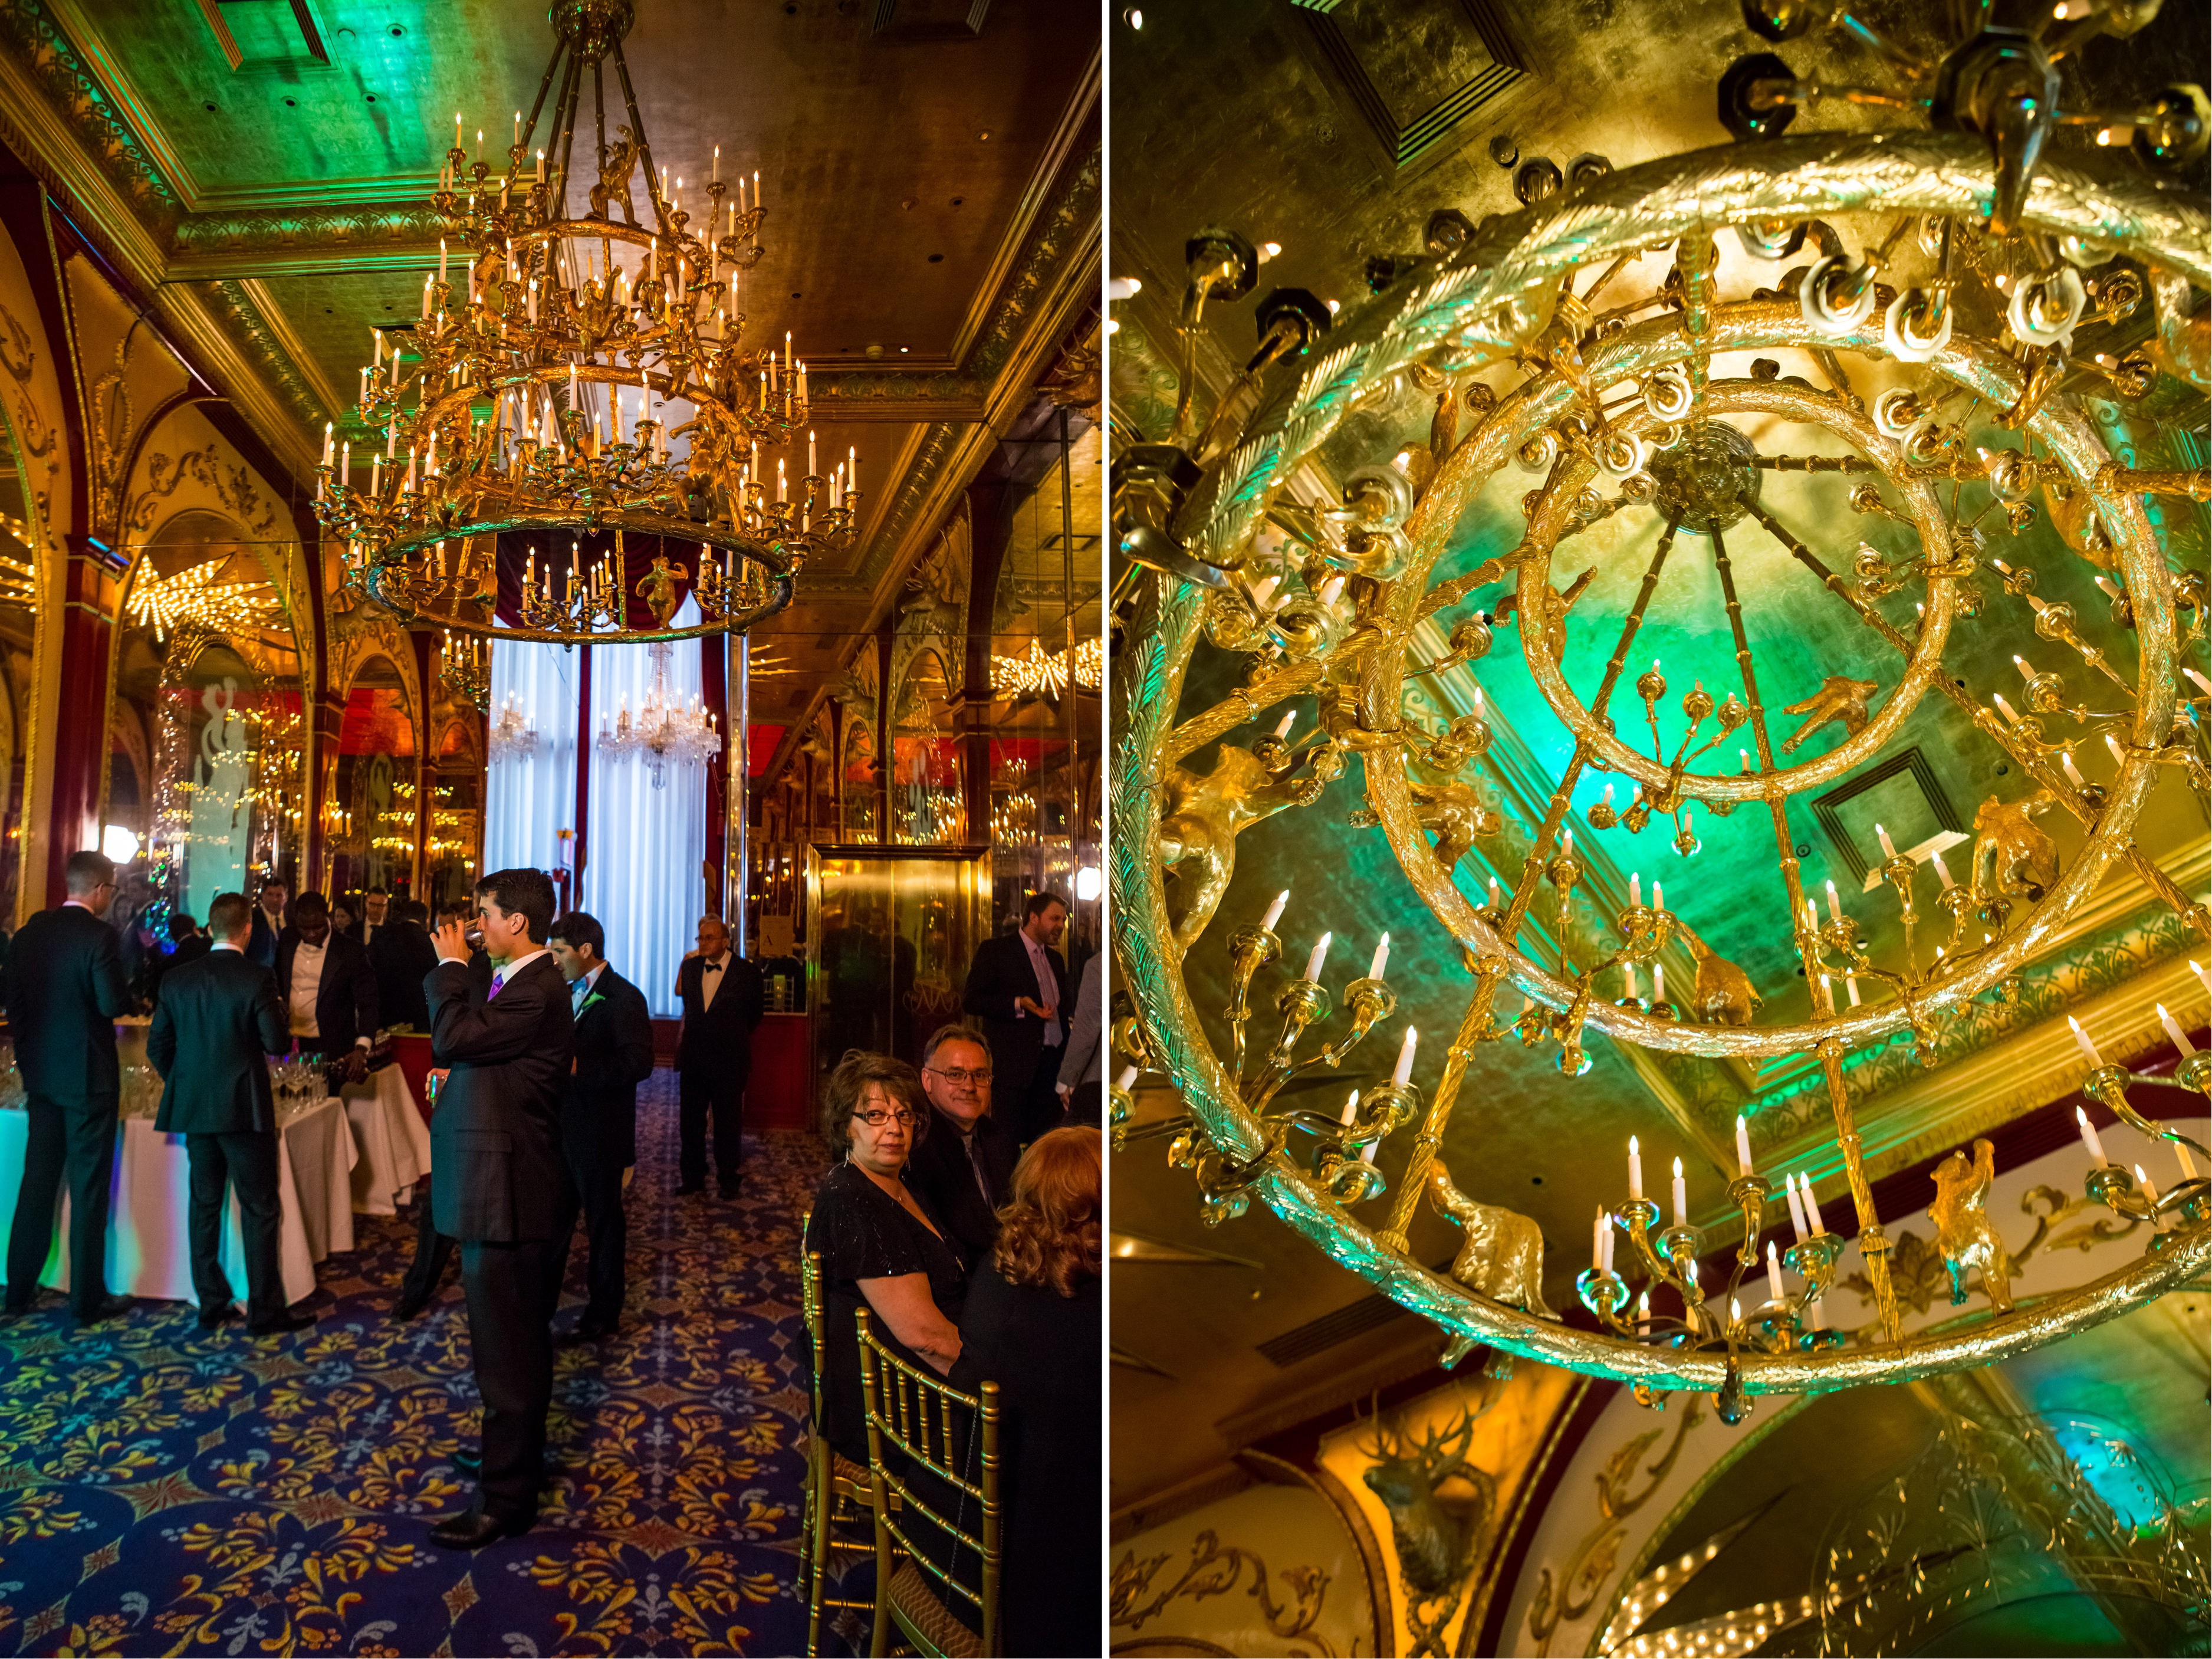 Emma_cleary_photography The Russian Tea Room3025